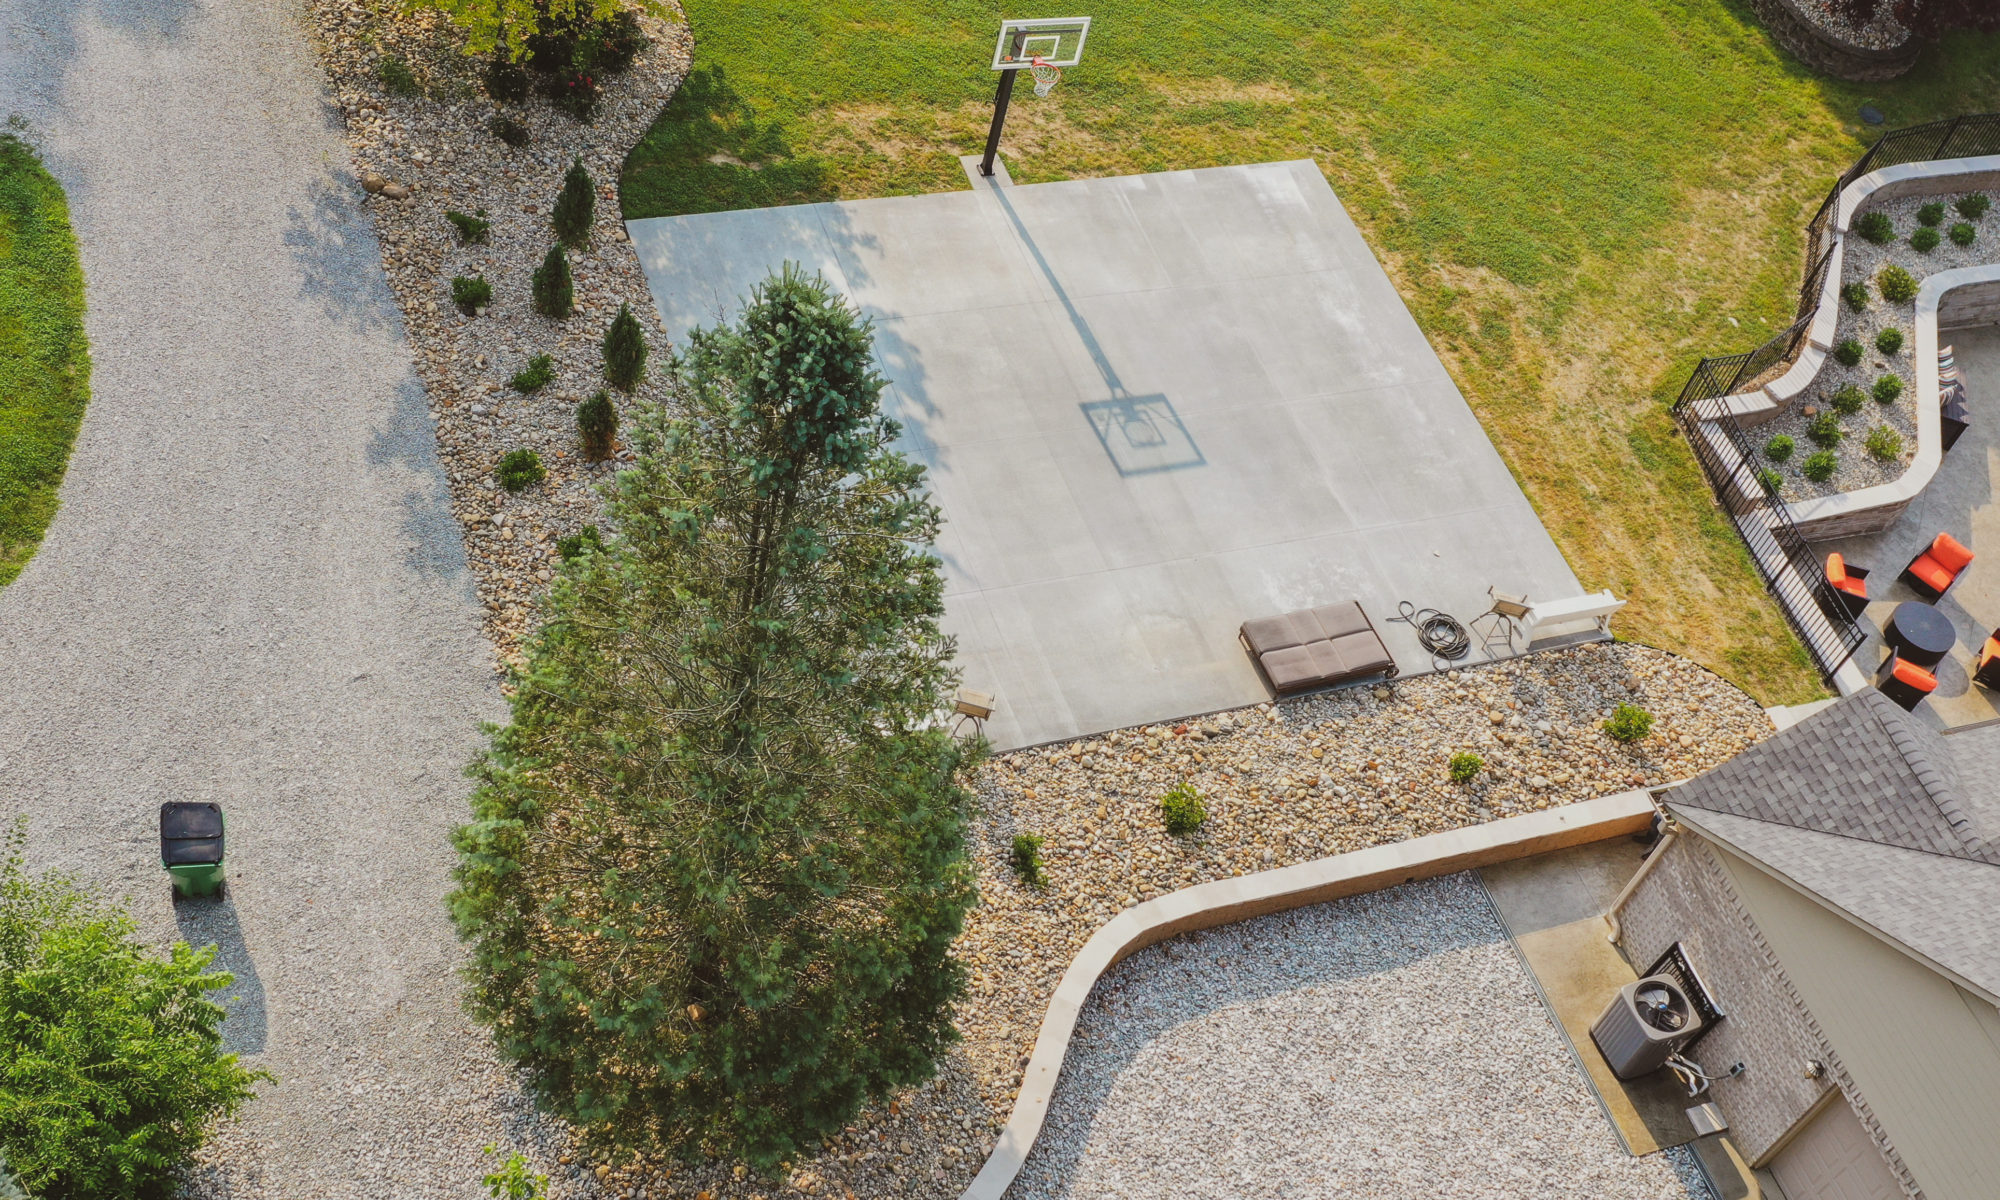 precision outdoors design build construction landscaping waterfall patio paver firepit seating wall seating wall pool deck basketball court ball hoops rocks boulders